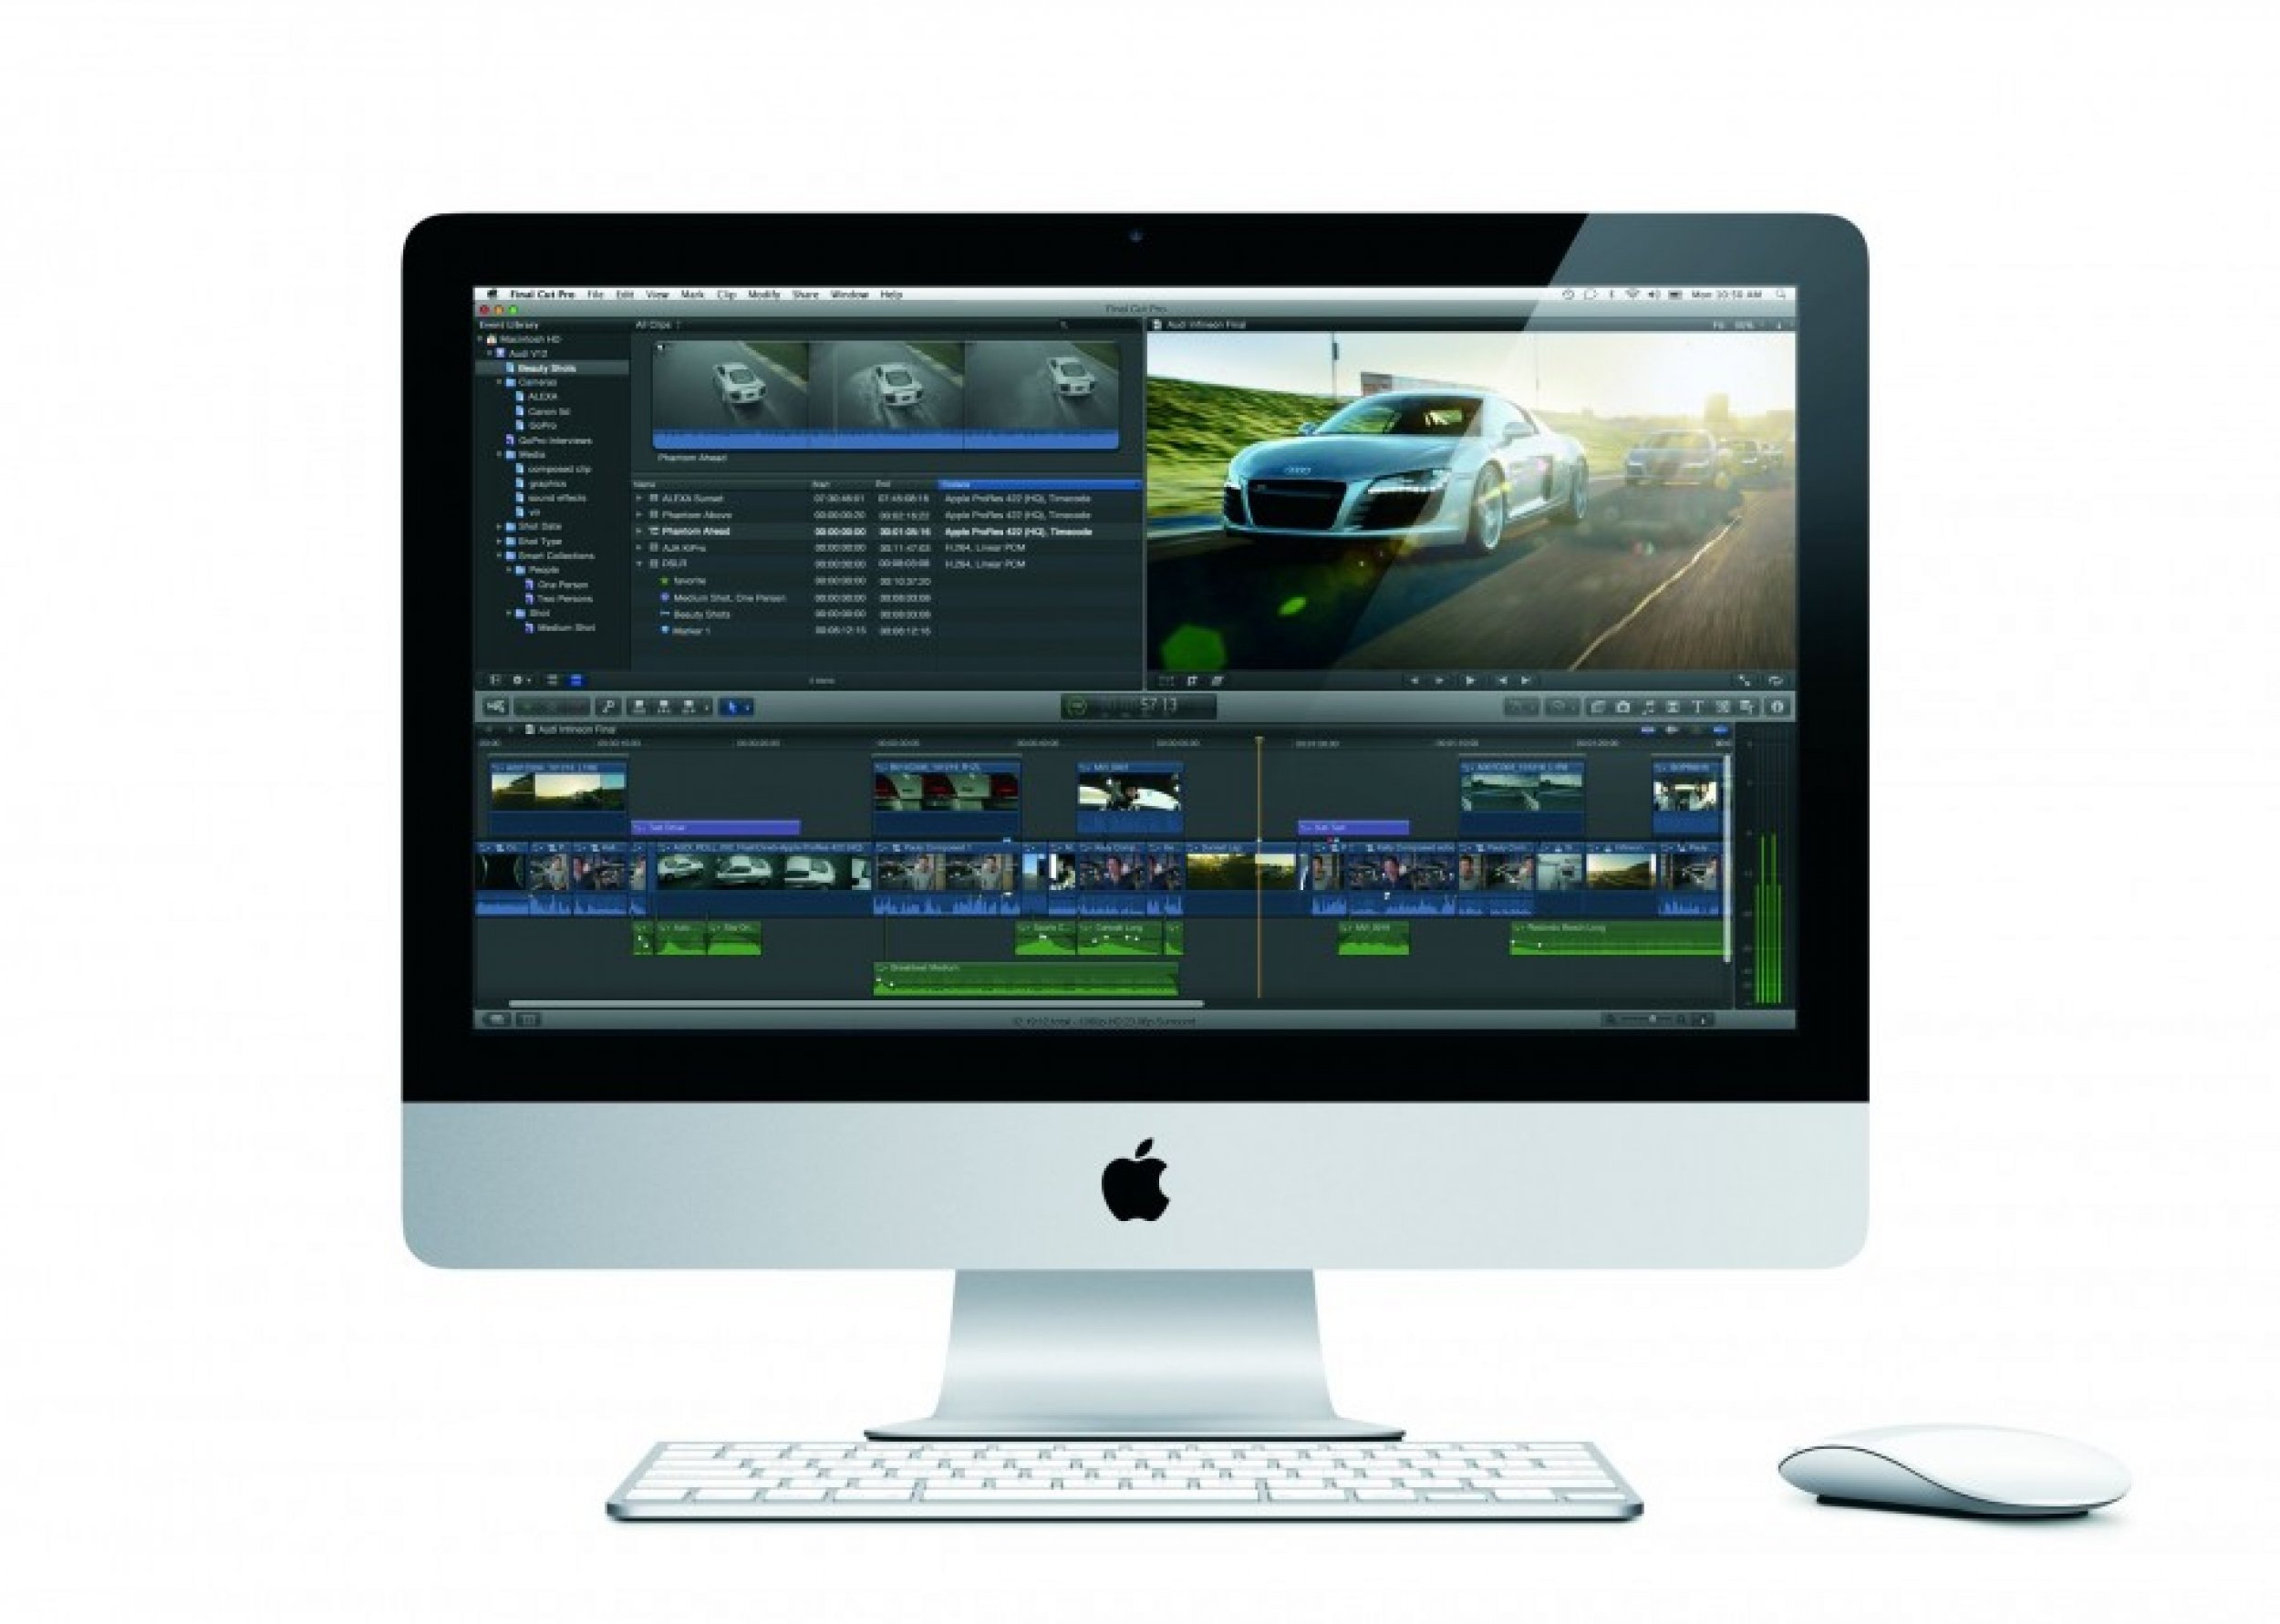 Apples Final Cut Pro X have led many drop their jaws unveiled at Mac Apple Store.